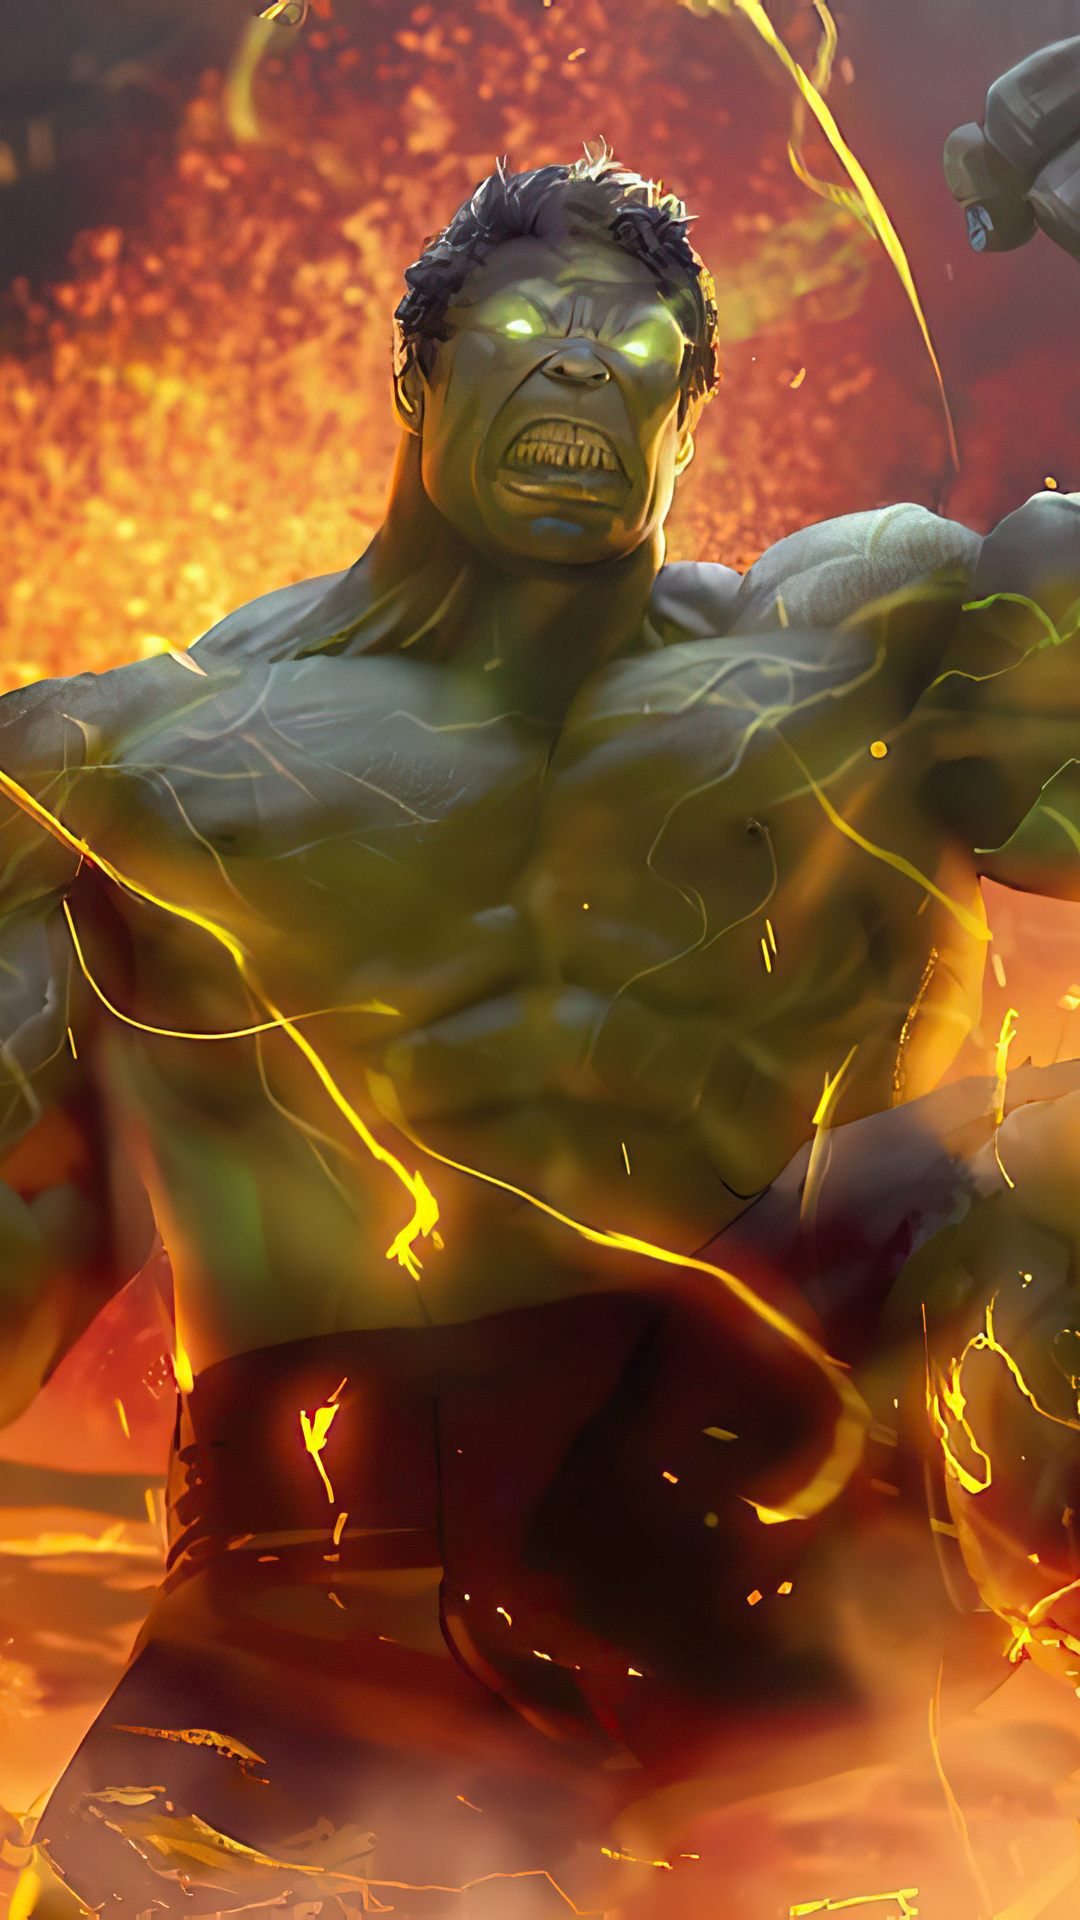 1080x1920 2020 Hulk Artwork 4k Iphone 7,6s,6 Plus, Pixel xl ,One Plus  3,3t,5 HD 4k Wallpapers, Images, Backgrounds, Photos and Pictures